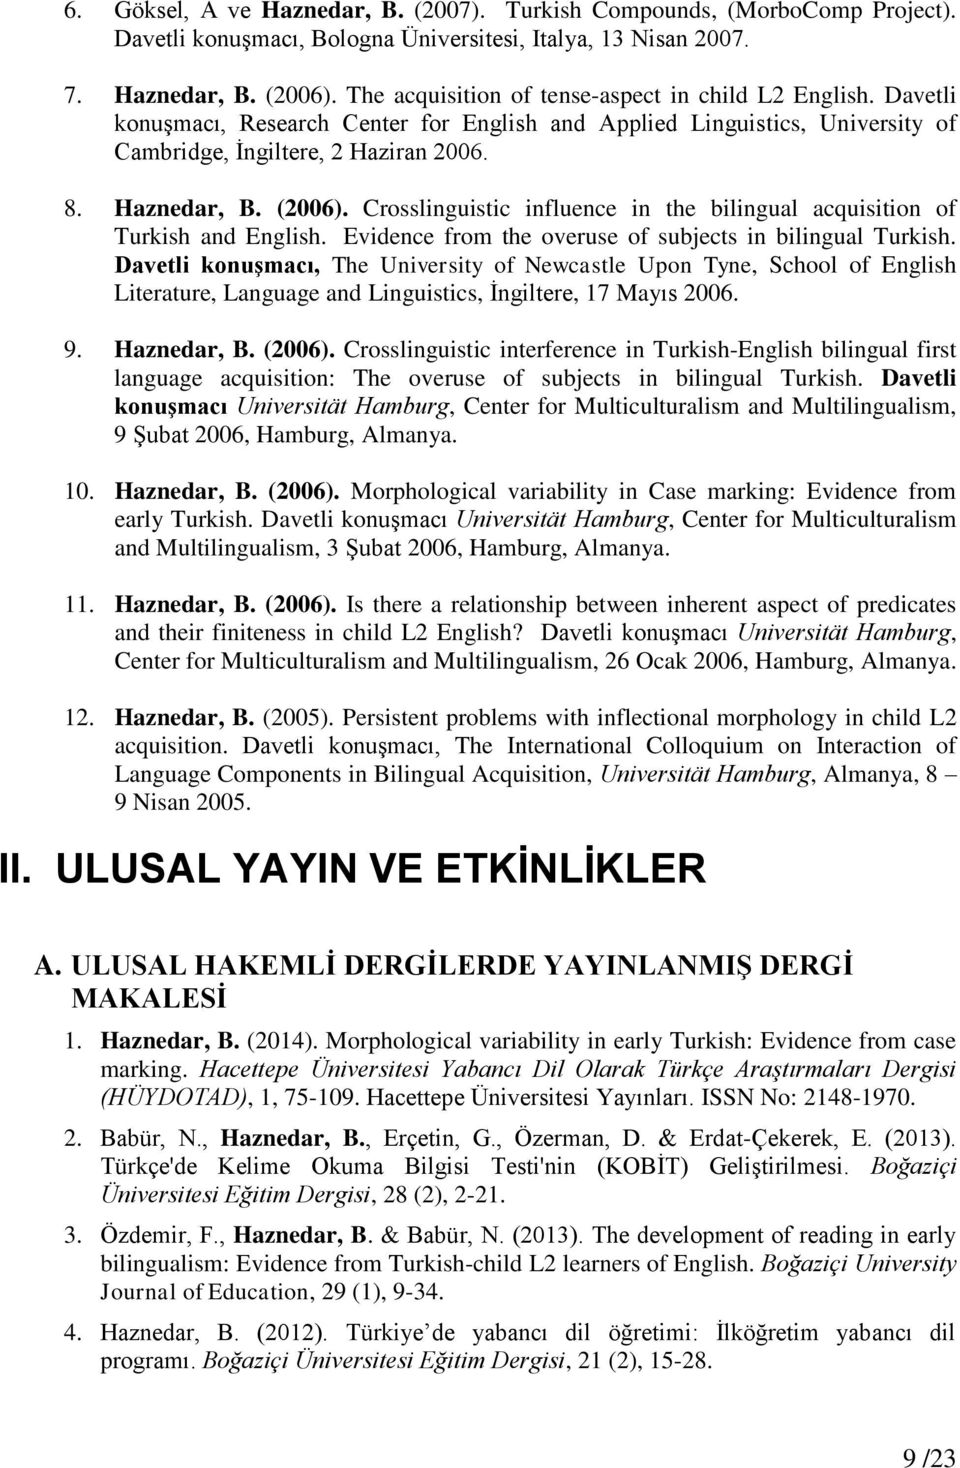 Crosslinguistic influence in the bilingual acquisition of Turkish and English. Evidence from the overuse of subjects in bilingual Turkish.